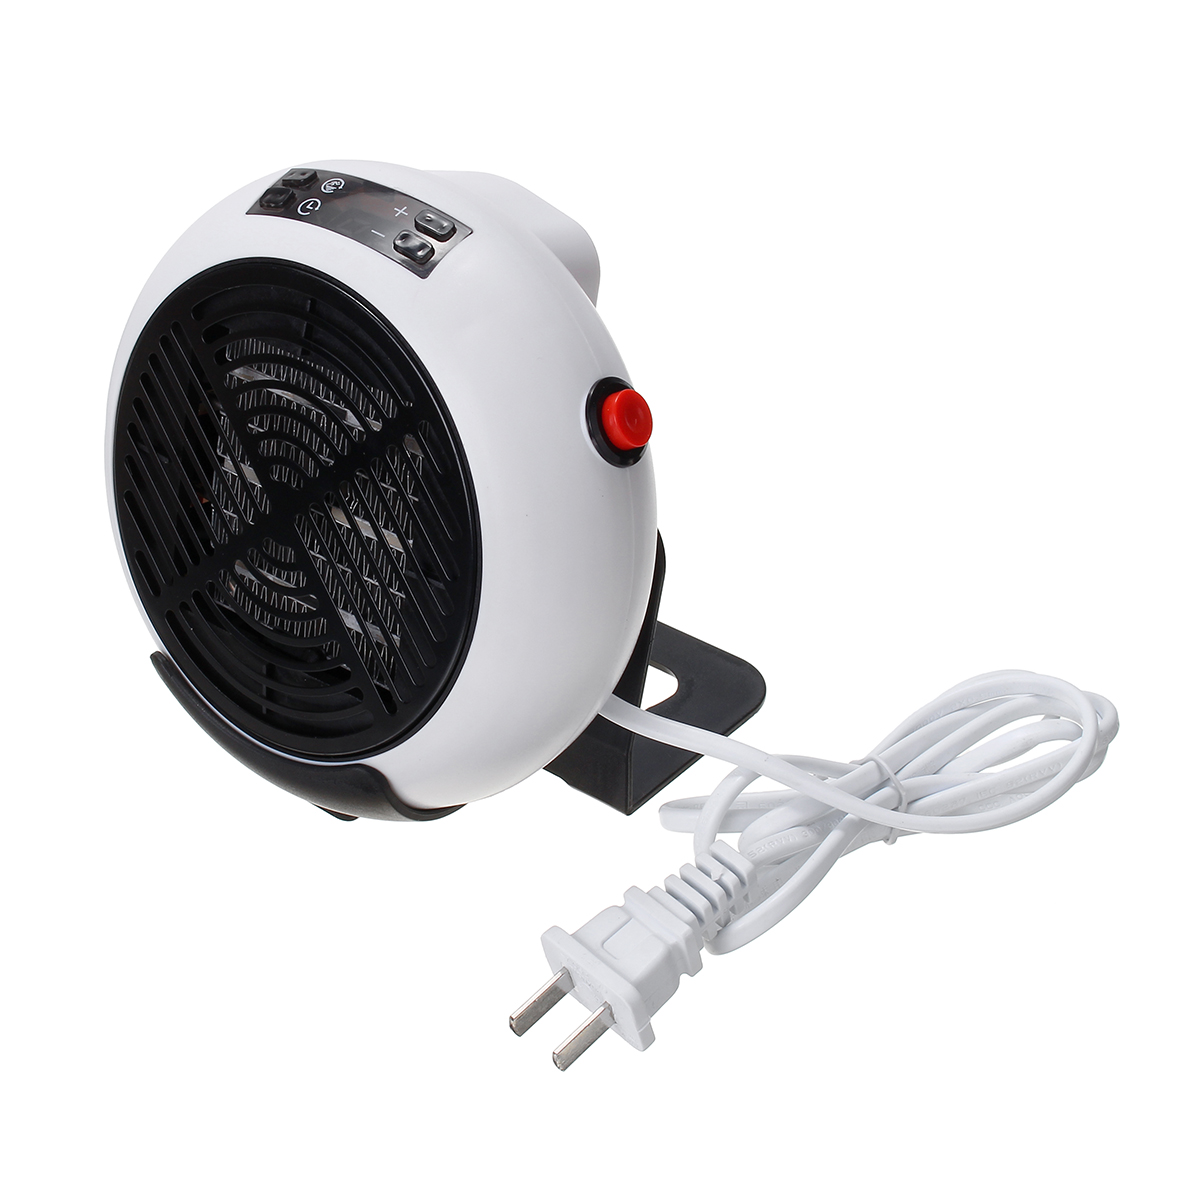 

220-240V 1000W Portable Mini Desktop Heater Fan 3 Speeds Timer Fast Heating Silent Winter Warmer for Home Office Power Off Protection